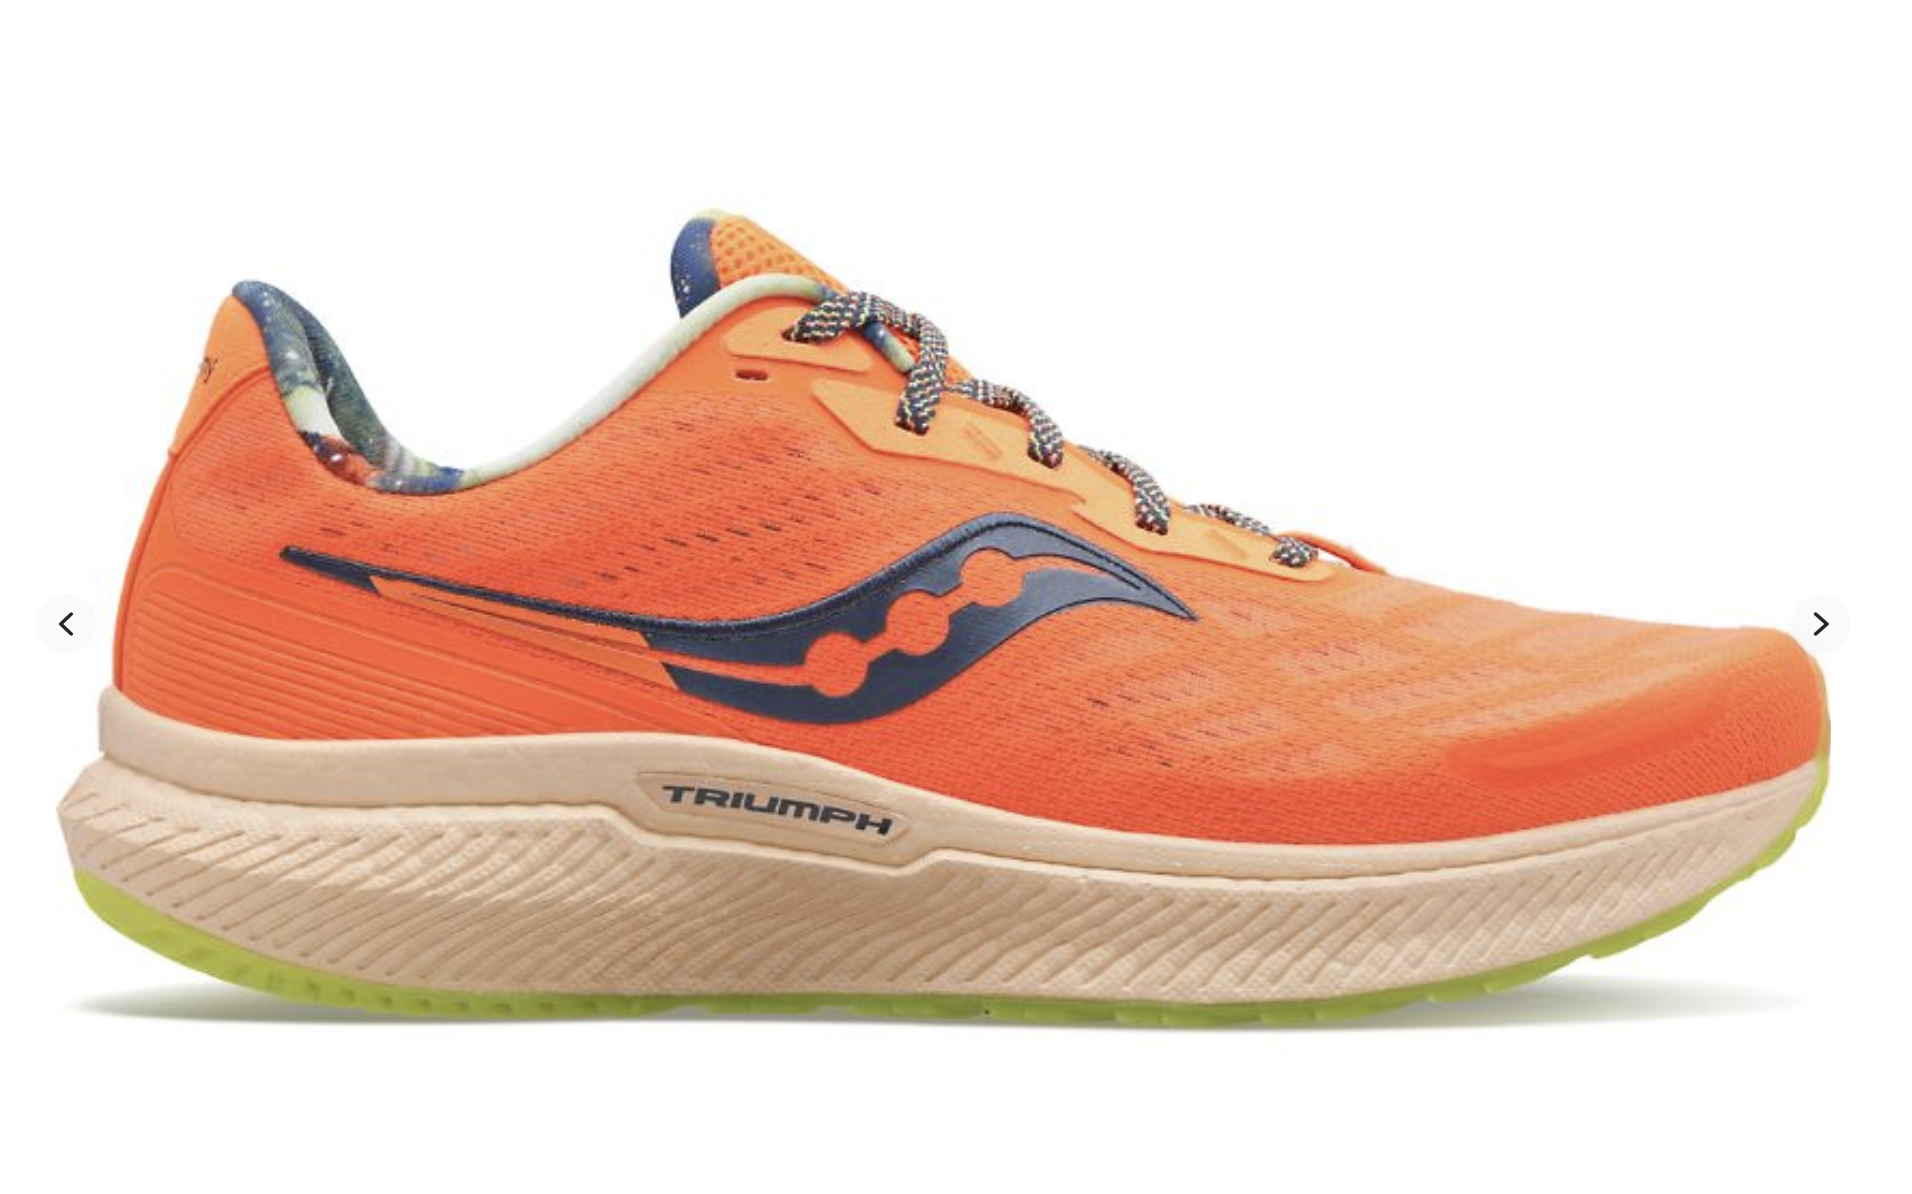 Saucony: Triumph 19 Running Shoes for .5